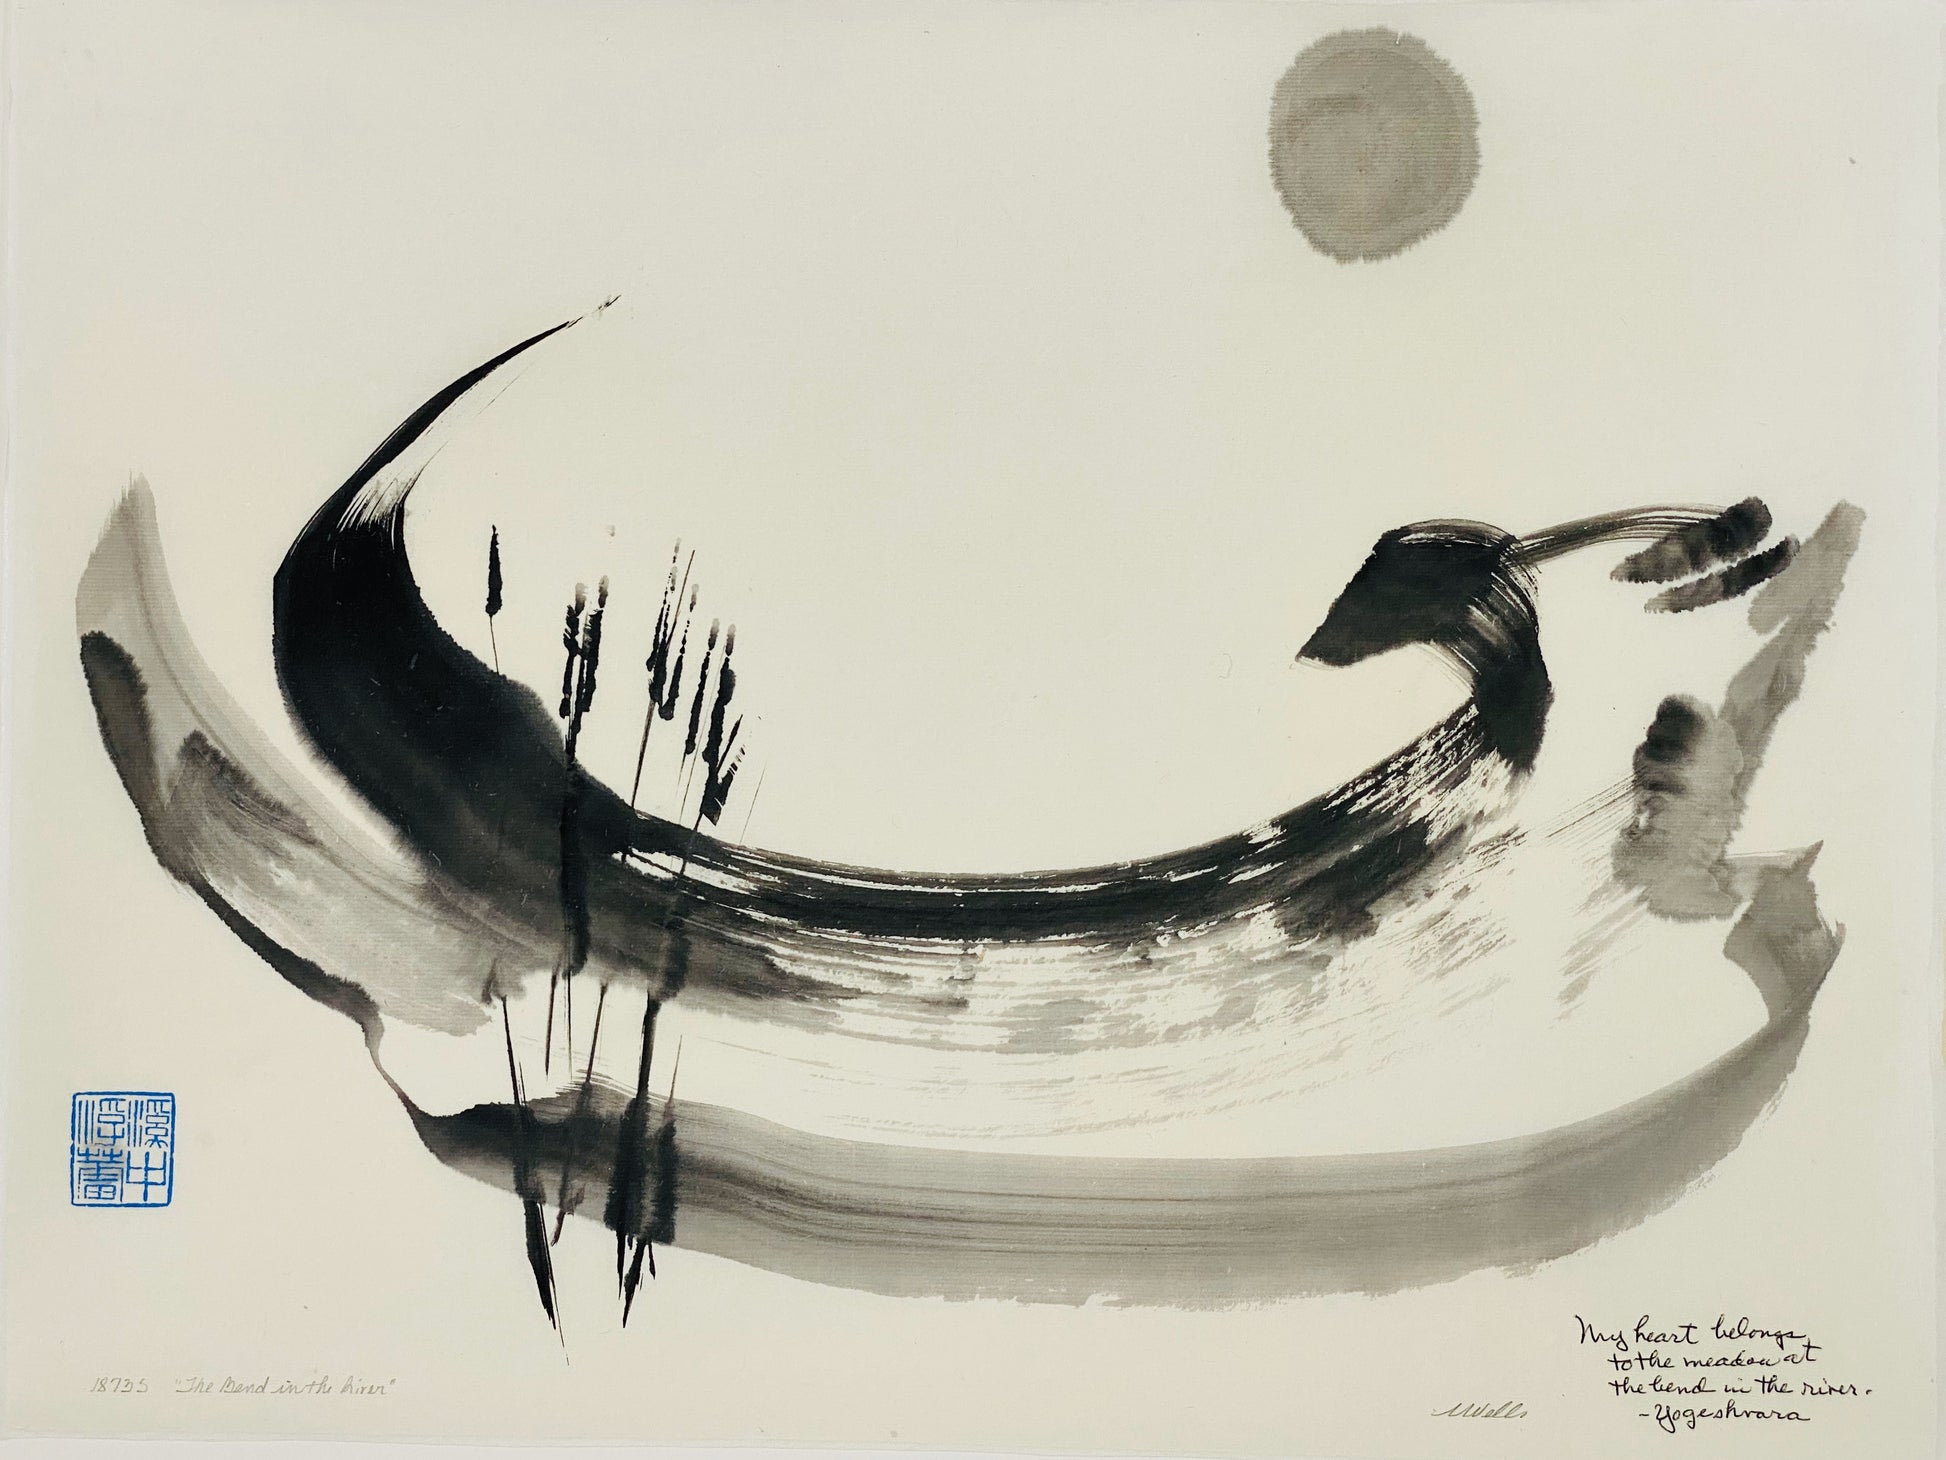 Abstract sumi e Print “The Bend in the River” by Marilyn Wells